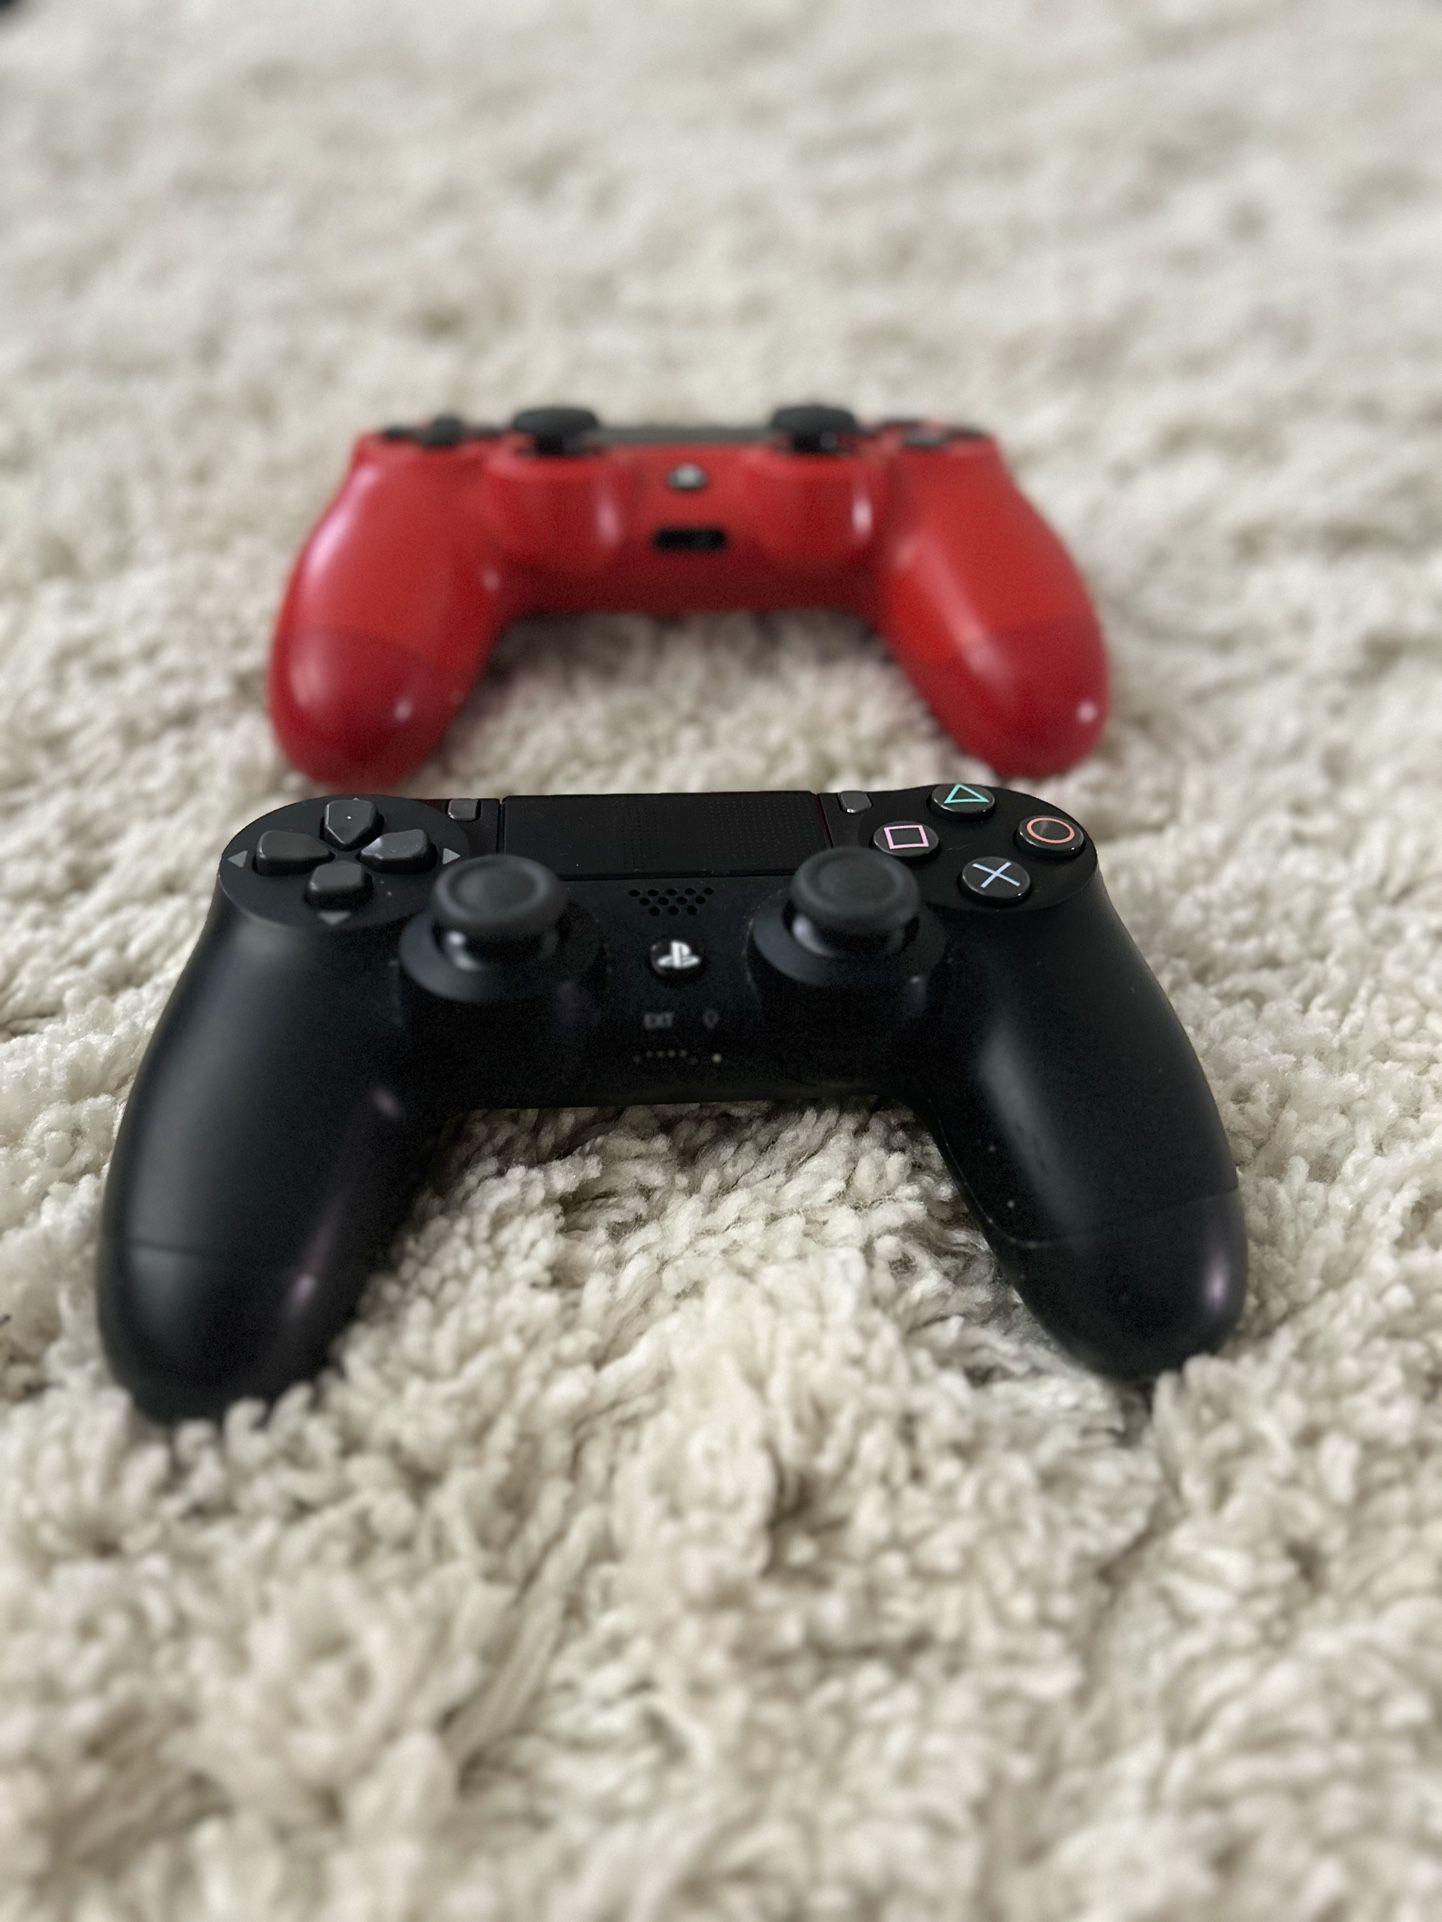 Controllers 